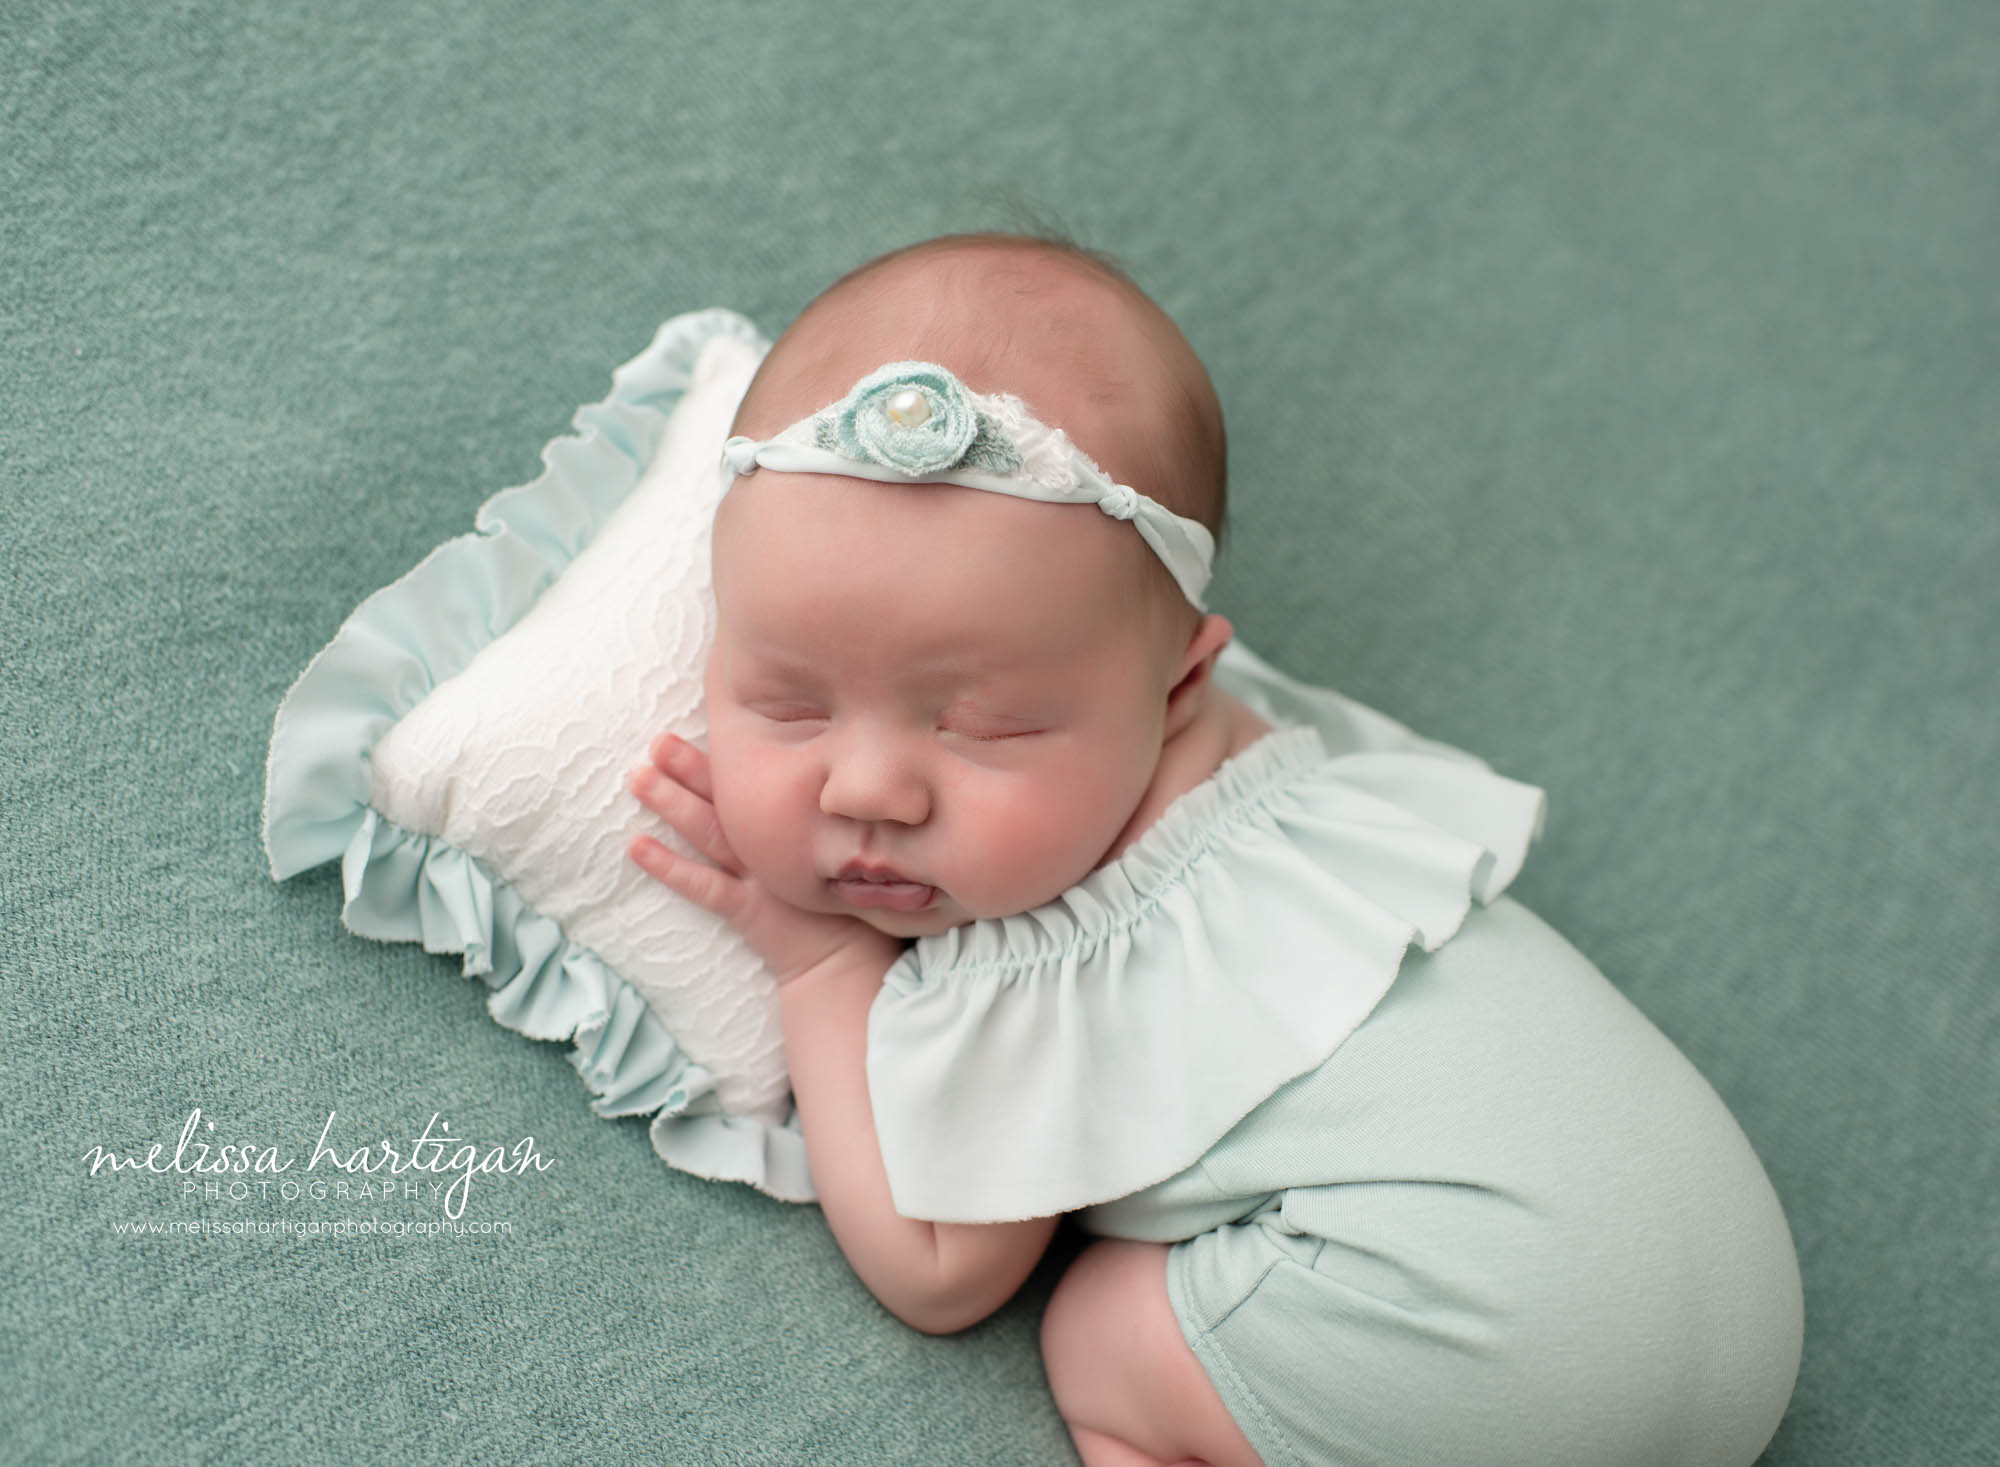 baby girl posed on newborn sized pillow with ruffles and mint green newborn outfit Stafford CT newborn Photographer